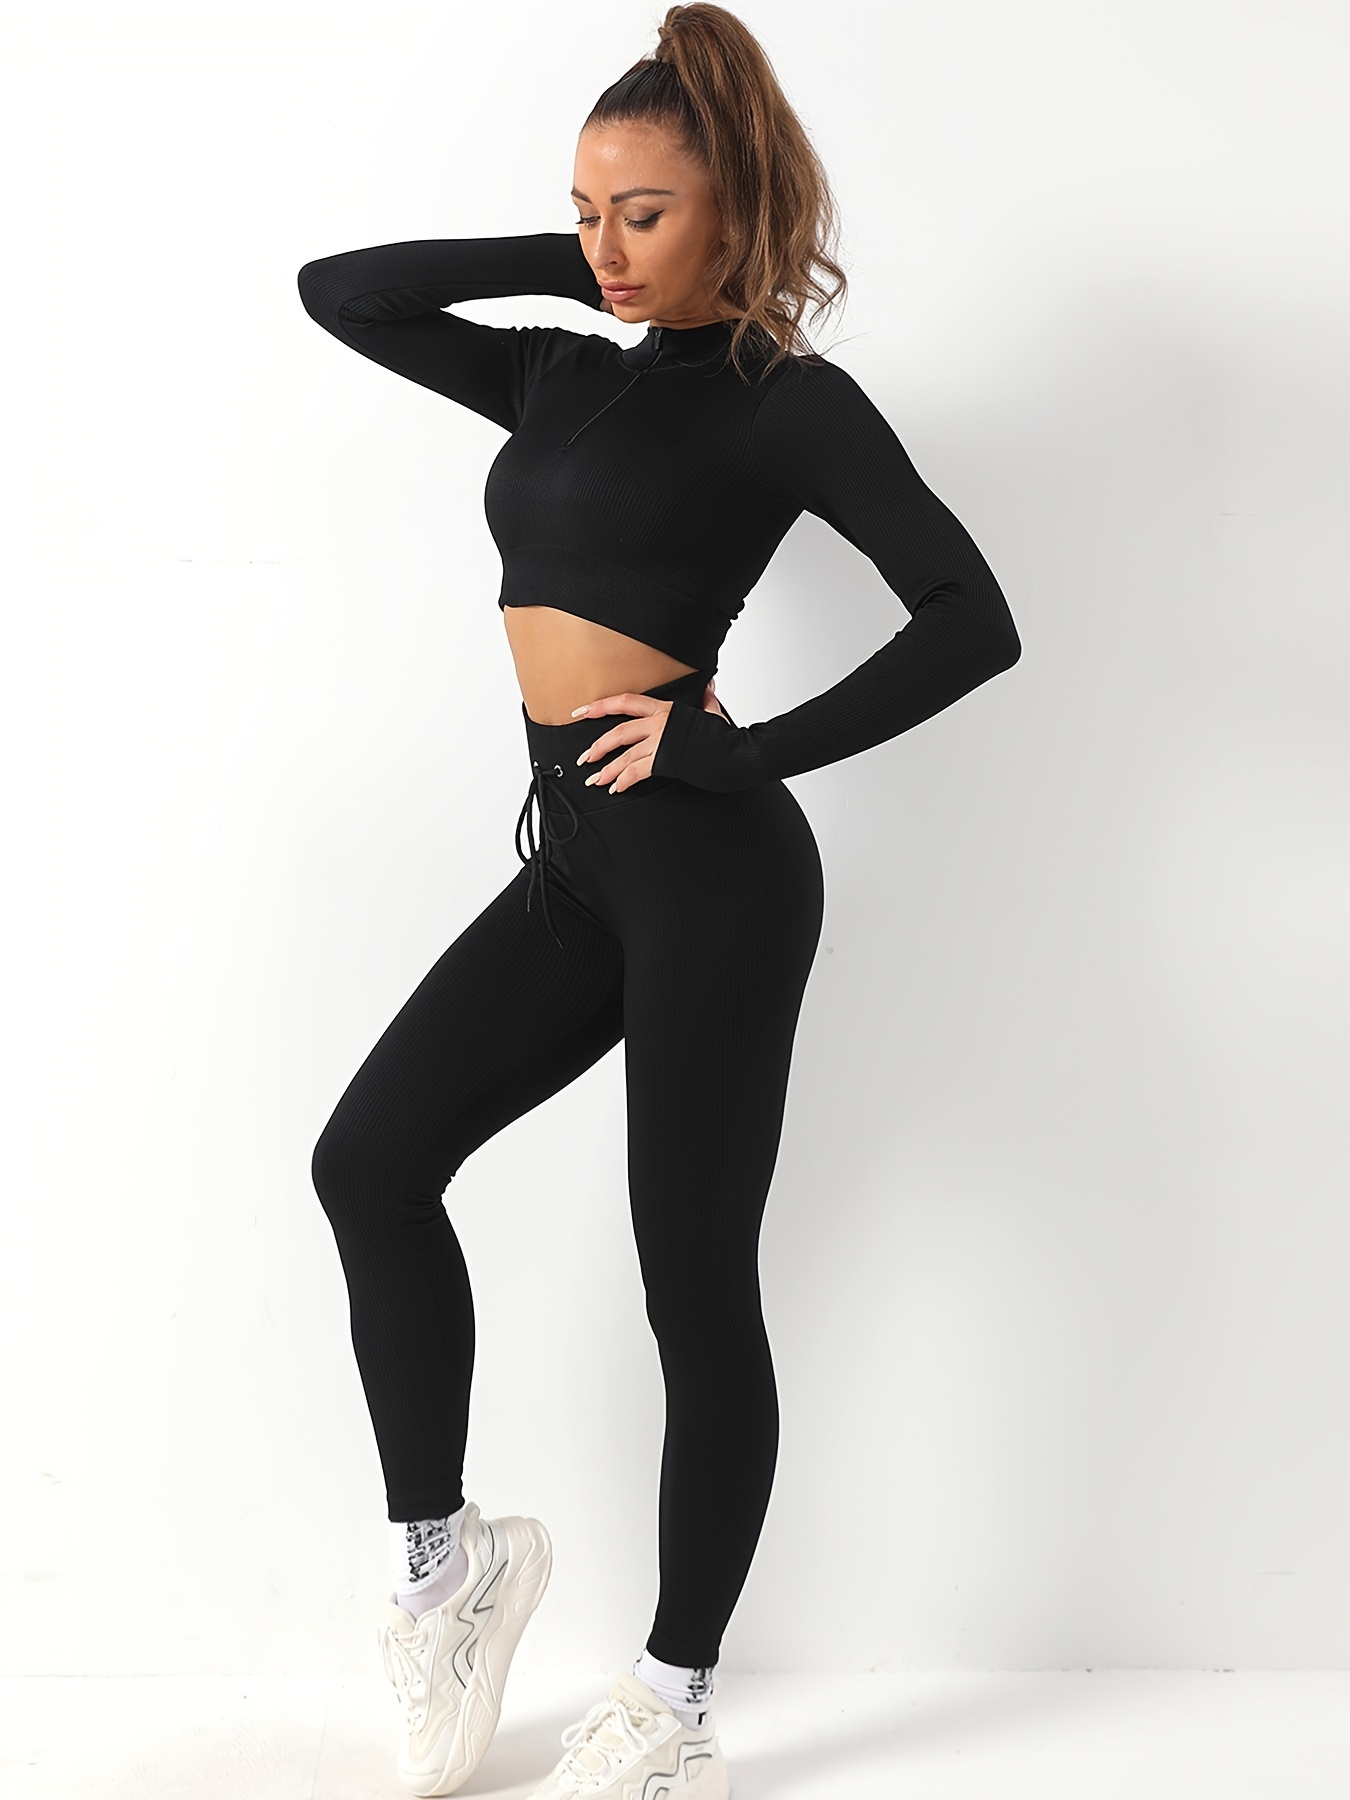 Women's High Waisted Fitness Cardio Leggings with Drawstring - Black